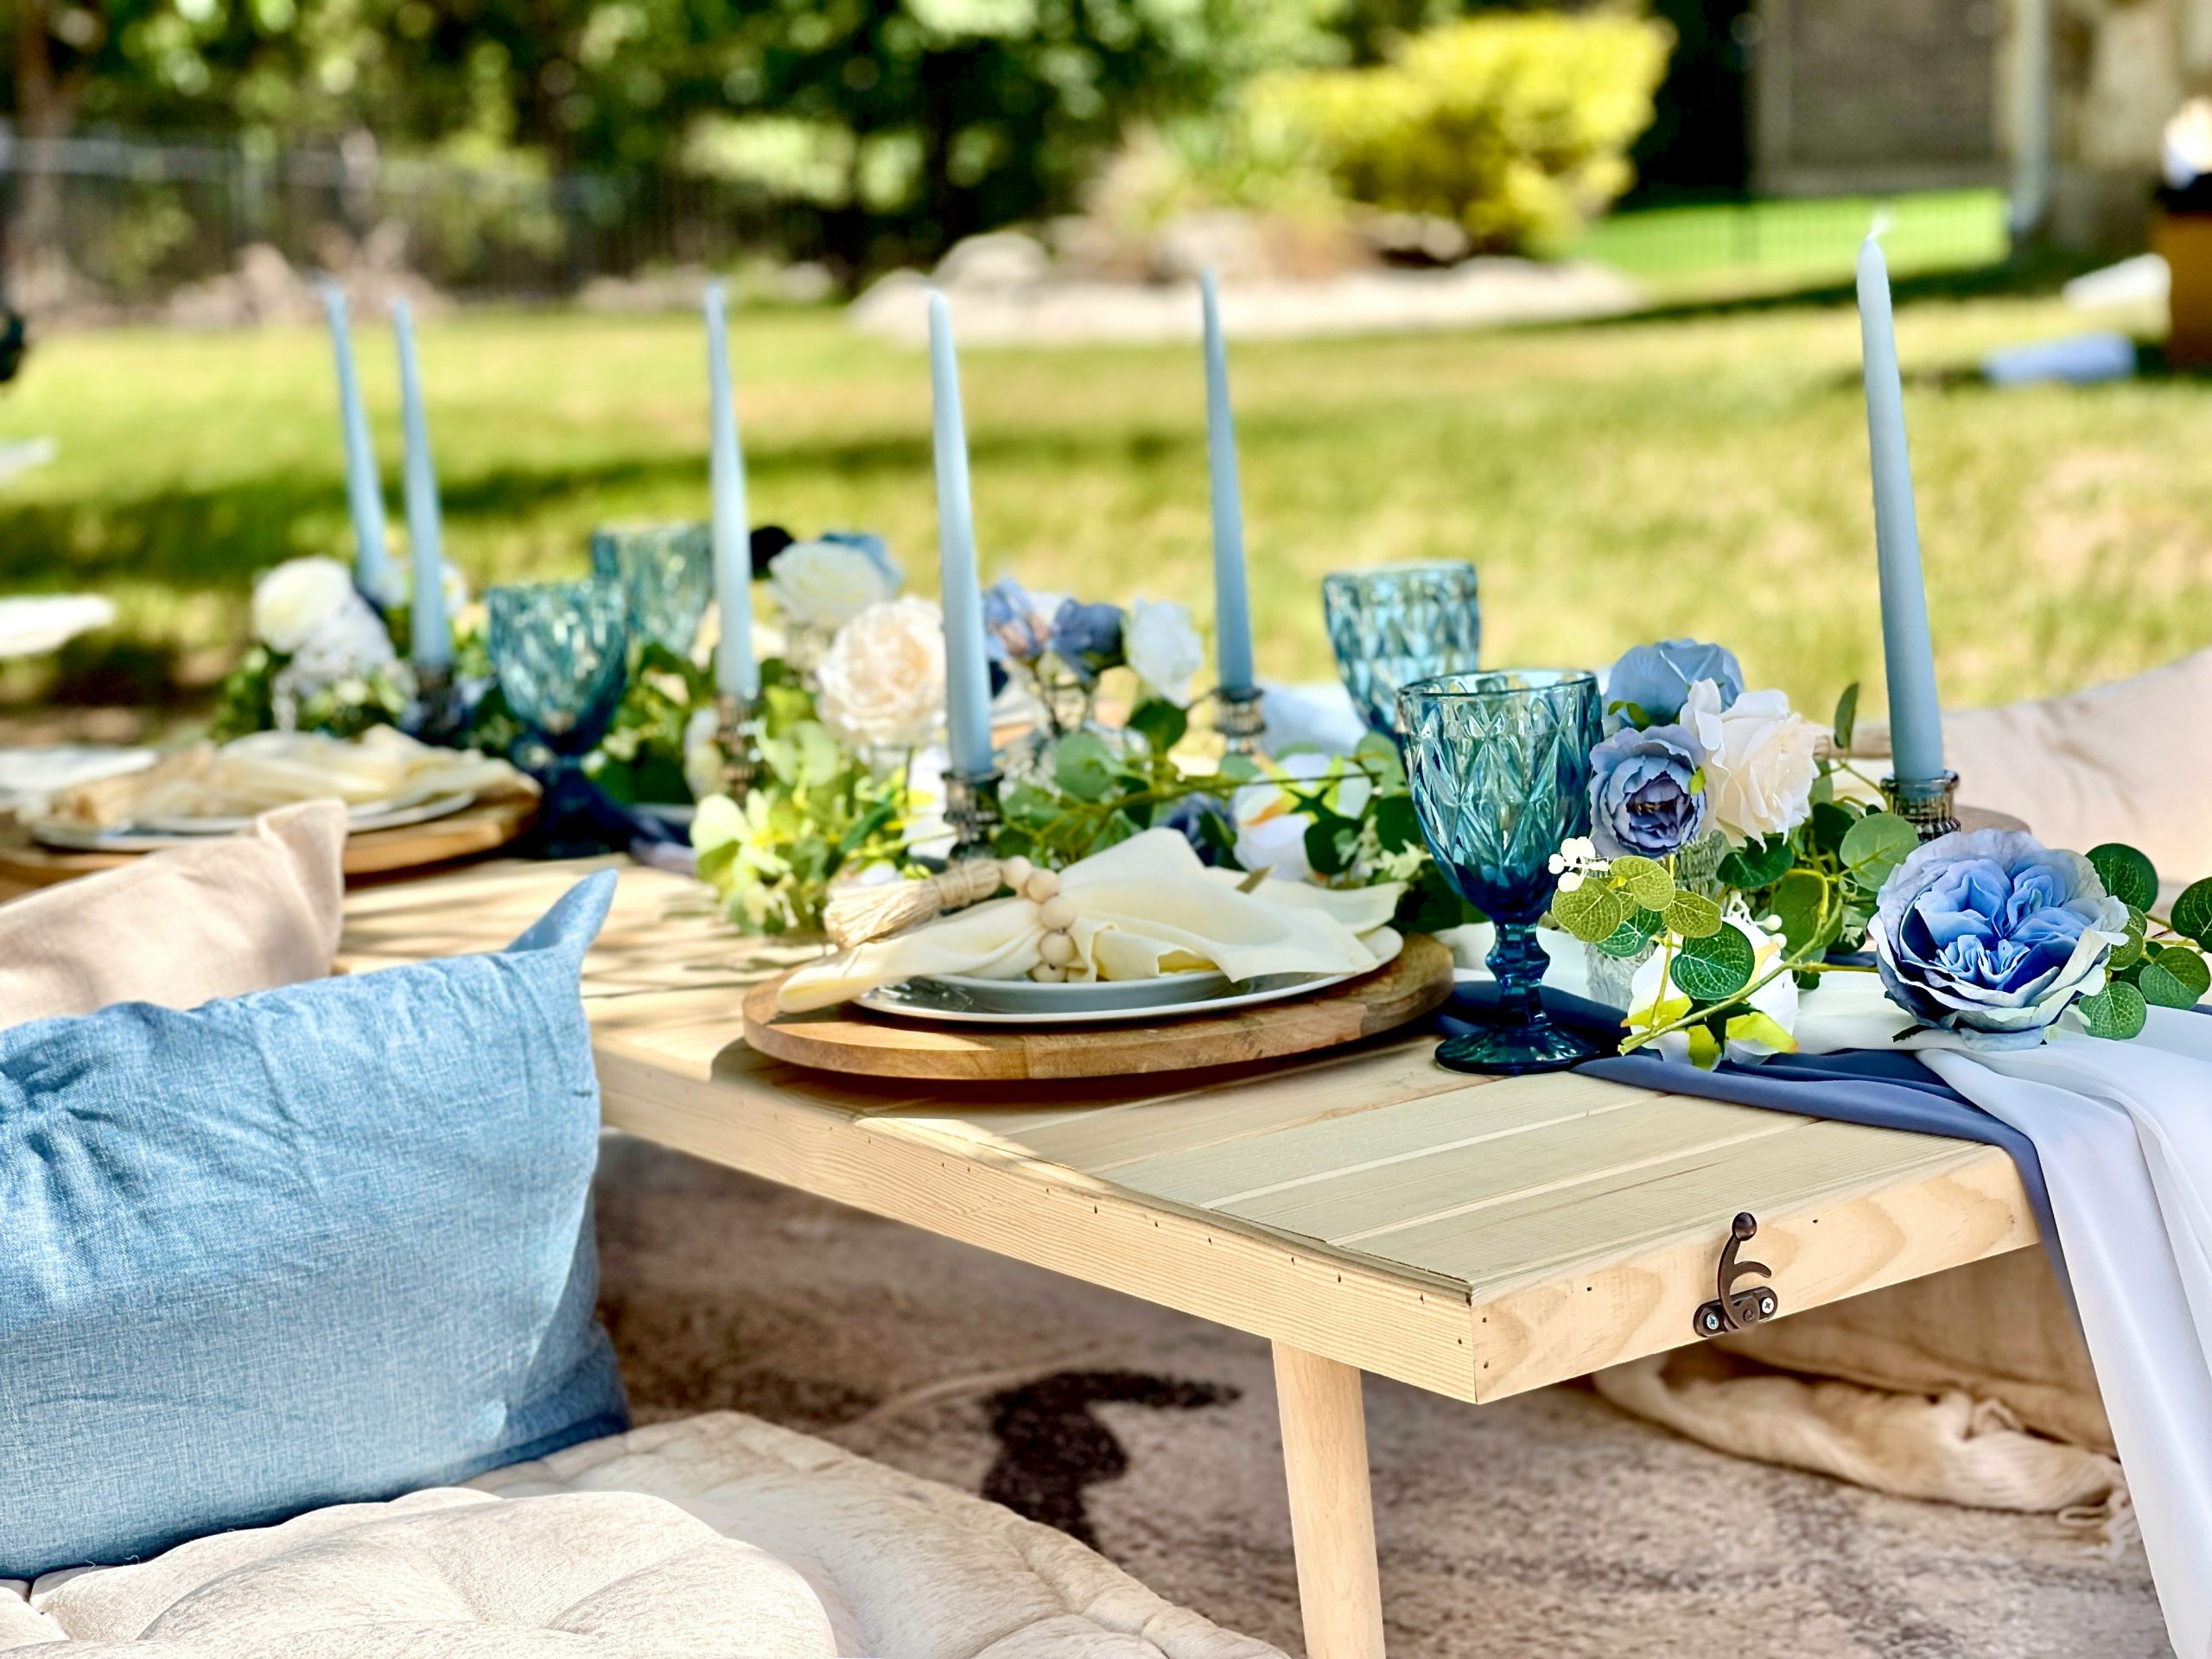 A blue and white picnic table set up in a grassy area, available through our Texas party rental service.